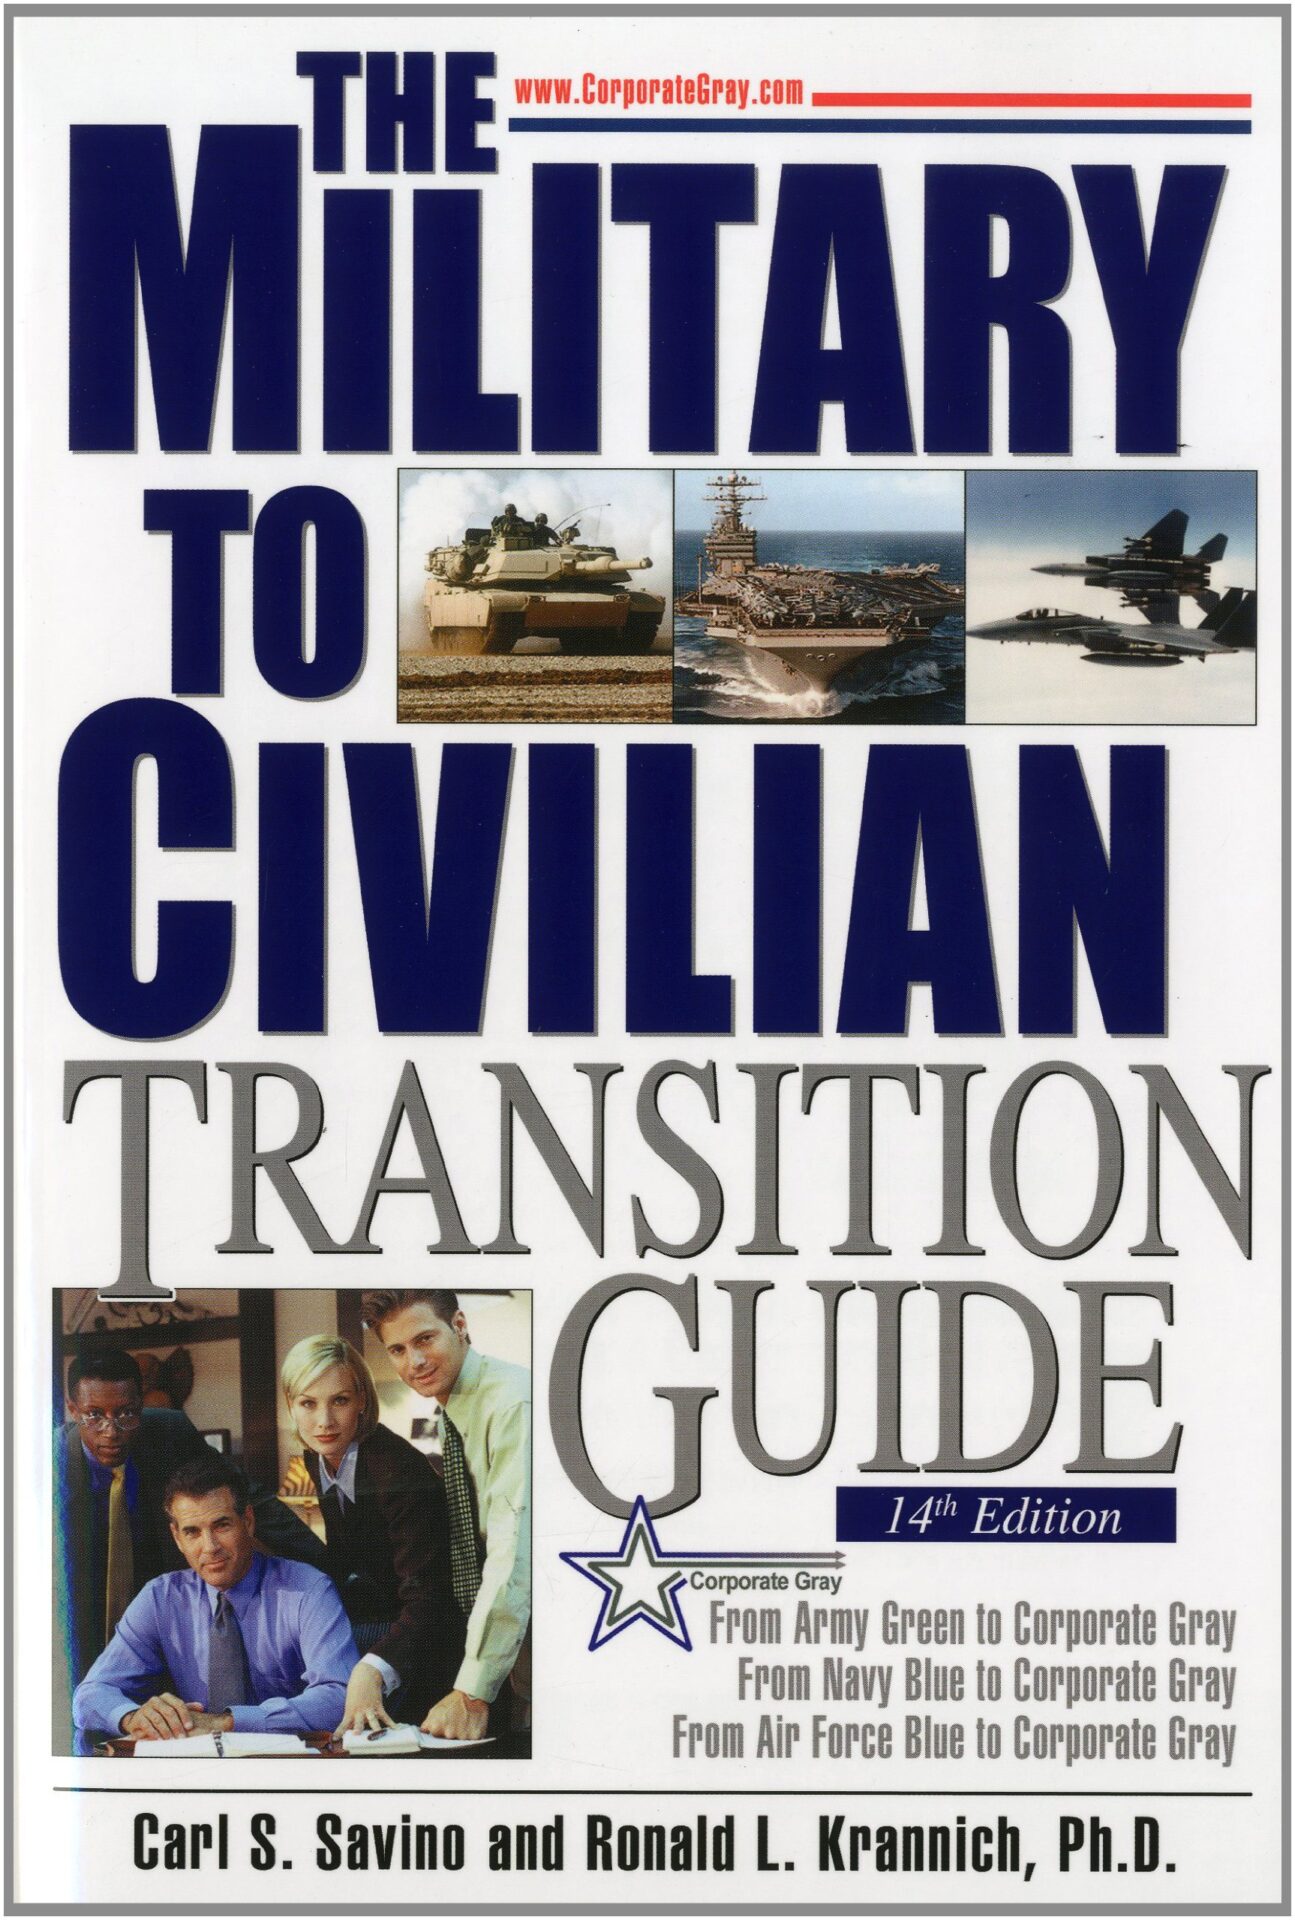 Military to Civilian Transition Guide for Army, Navy, Marines and Air Force service members.